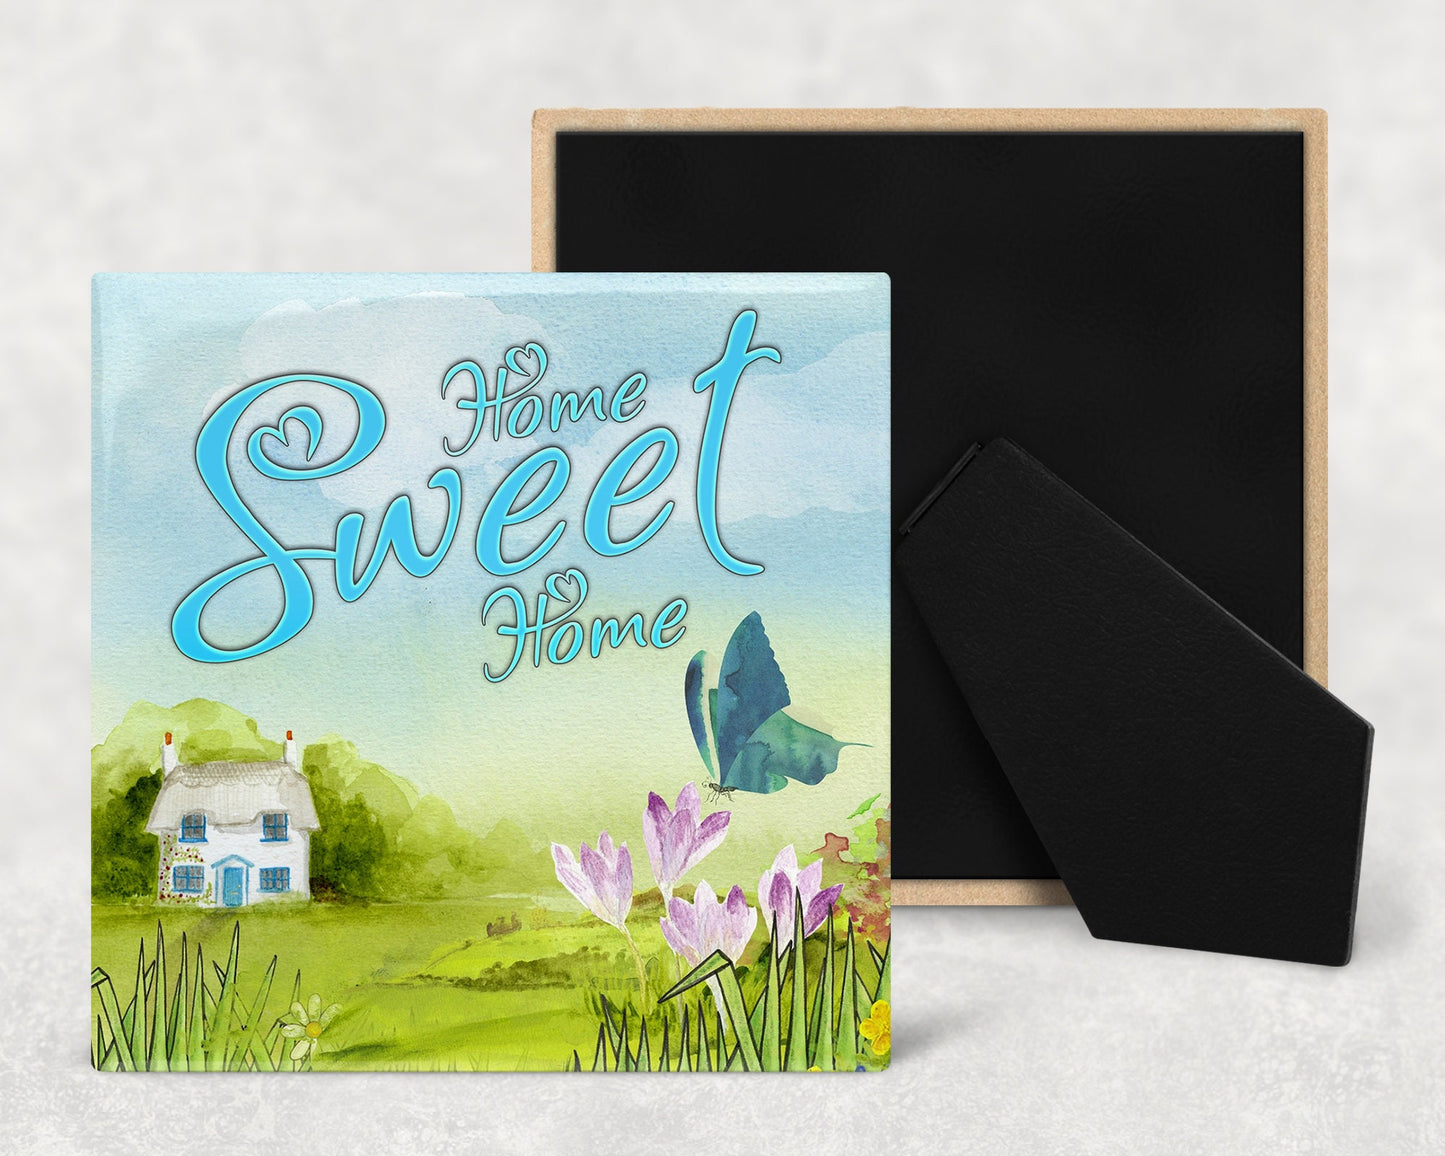 Home Sweet Home Art Decorative Ceramic Tile with Optional Easel Back - Available in 3 Sizes